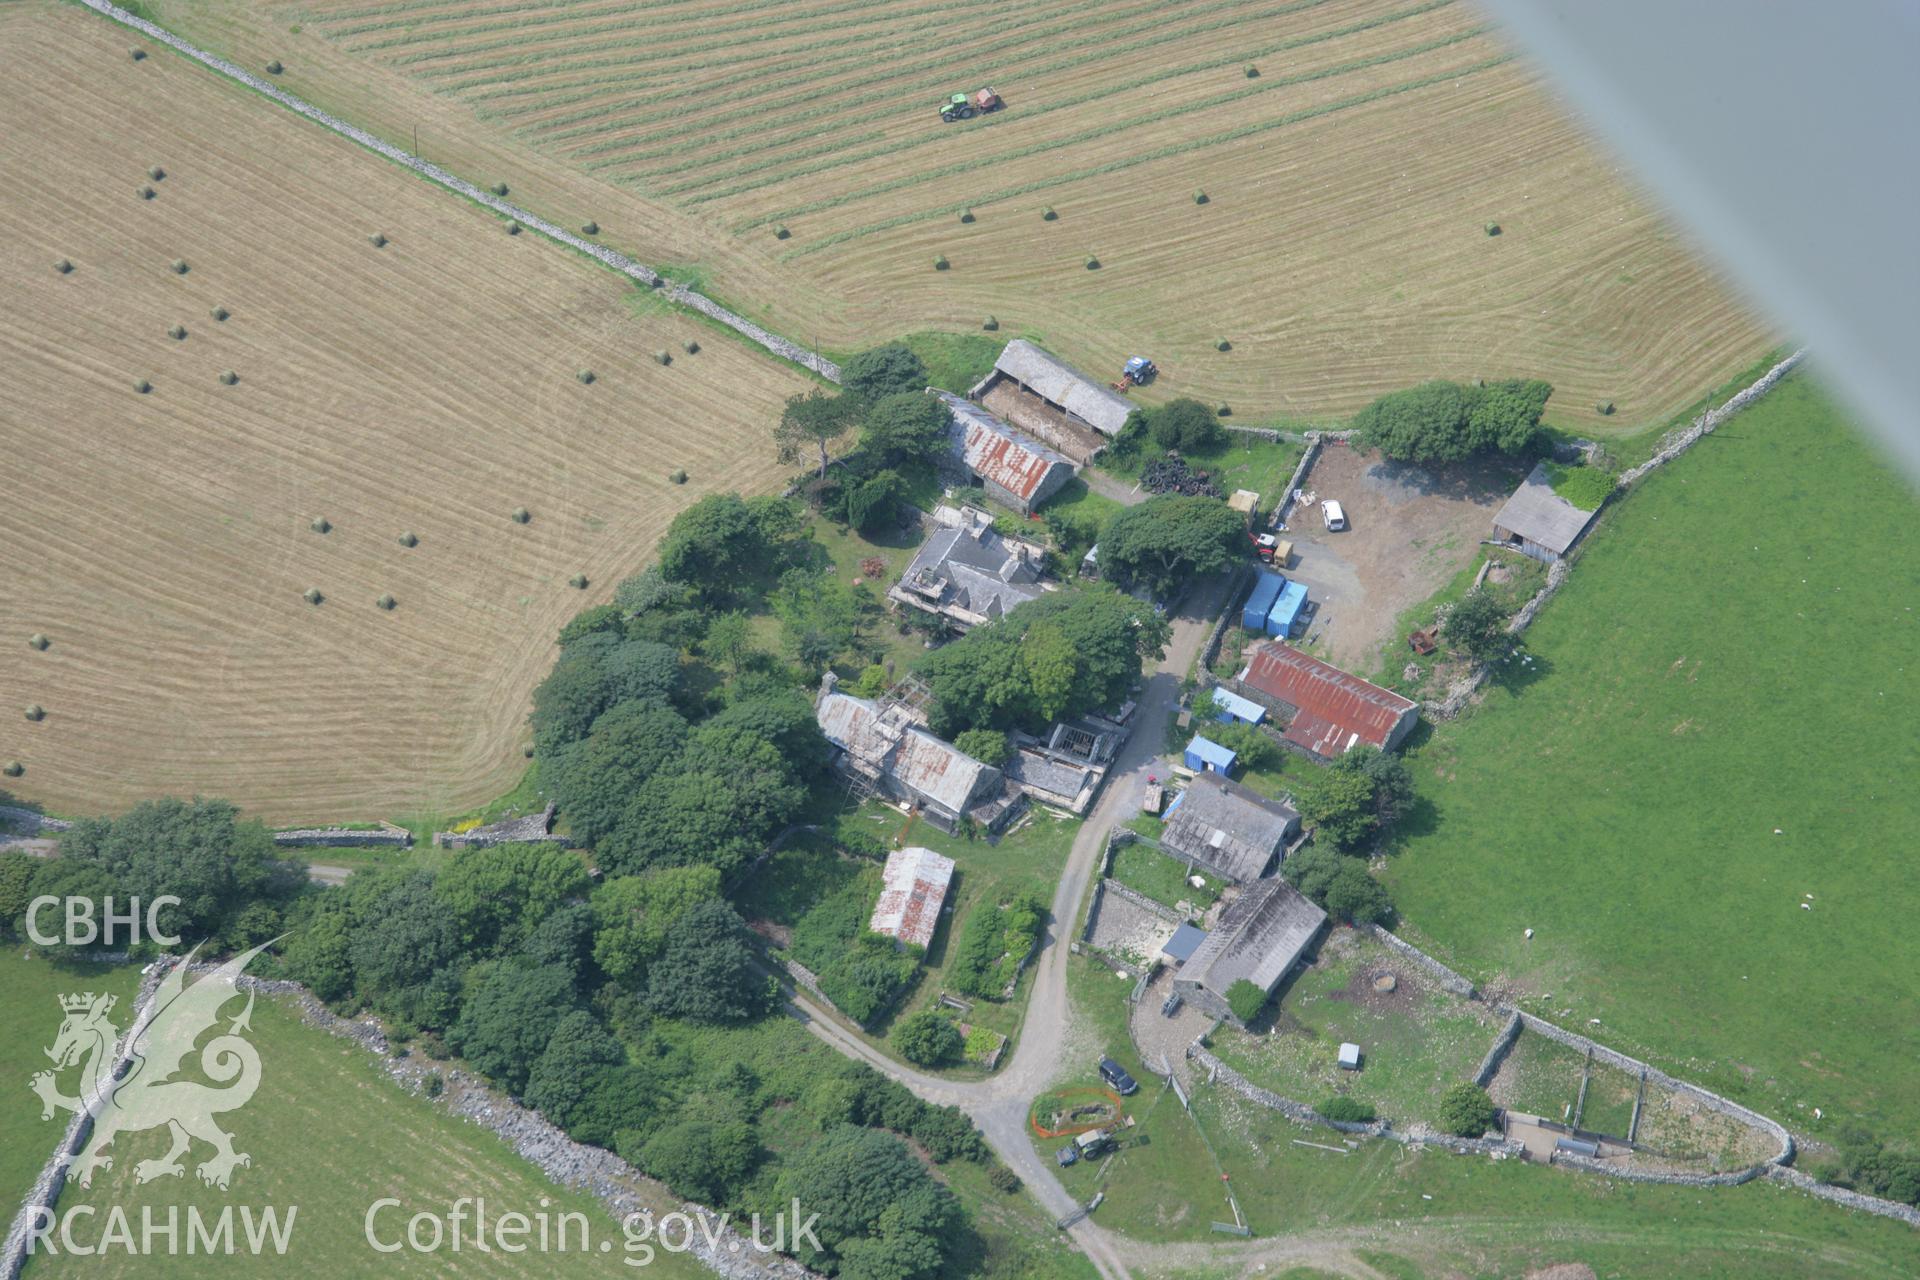 RCAHMW colour oblique aerial photograph of Abbey Farm, Egryn. Taken on 04 July 2006 by Toby Driver.